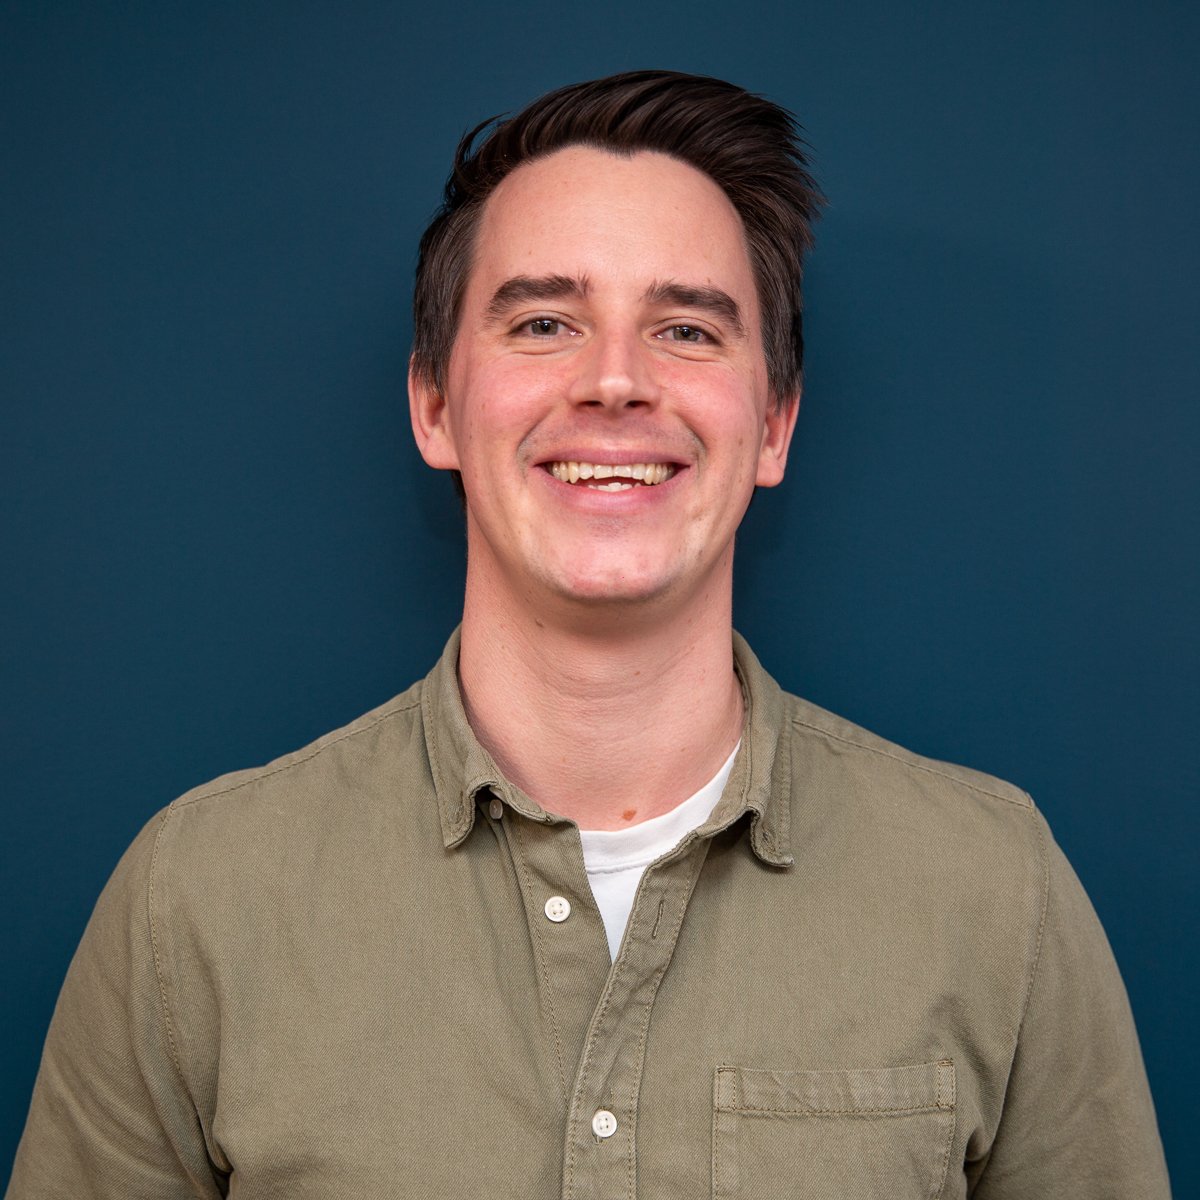 A cheerful man with a friendly smile wearing a casual olive green shirt against a deep blue background, representing an AV company.